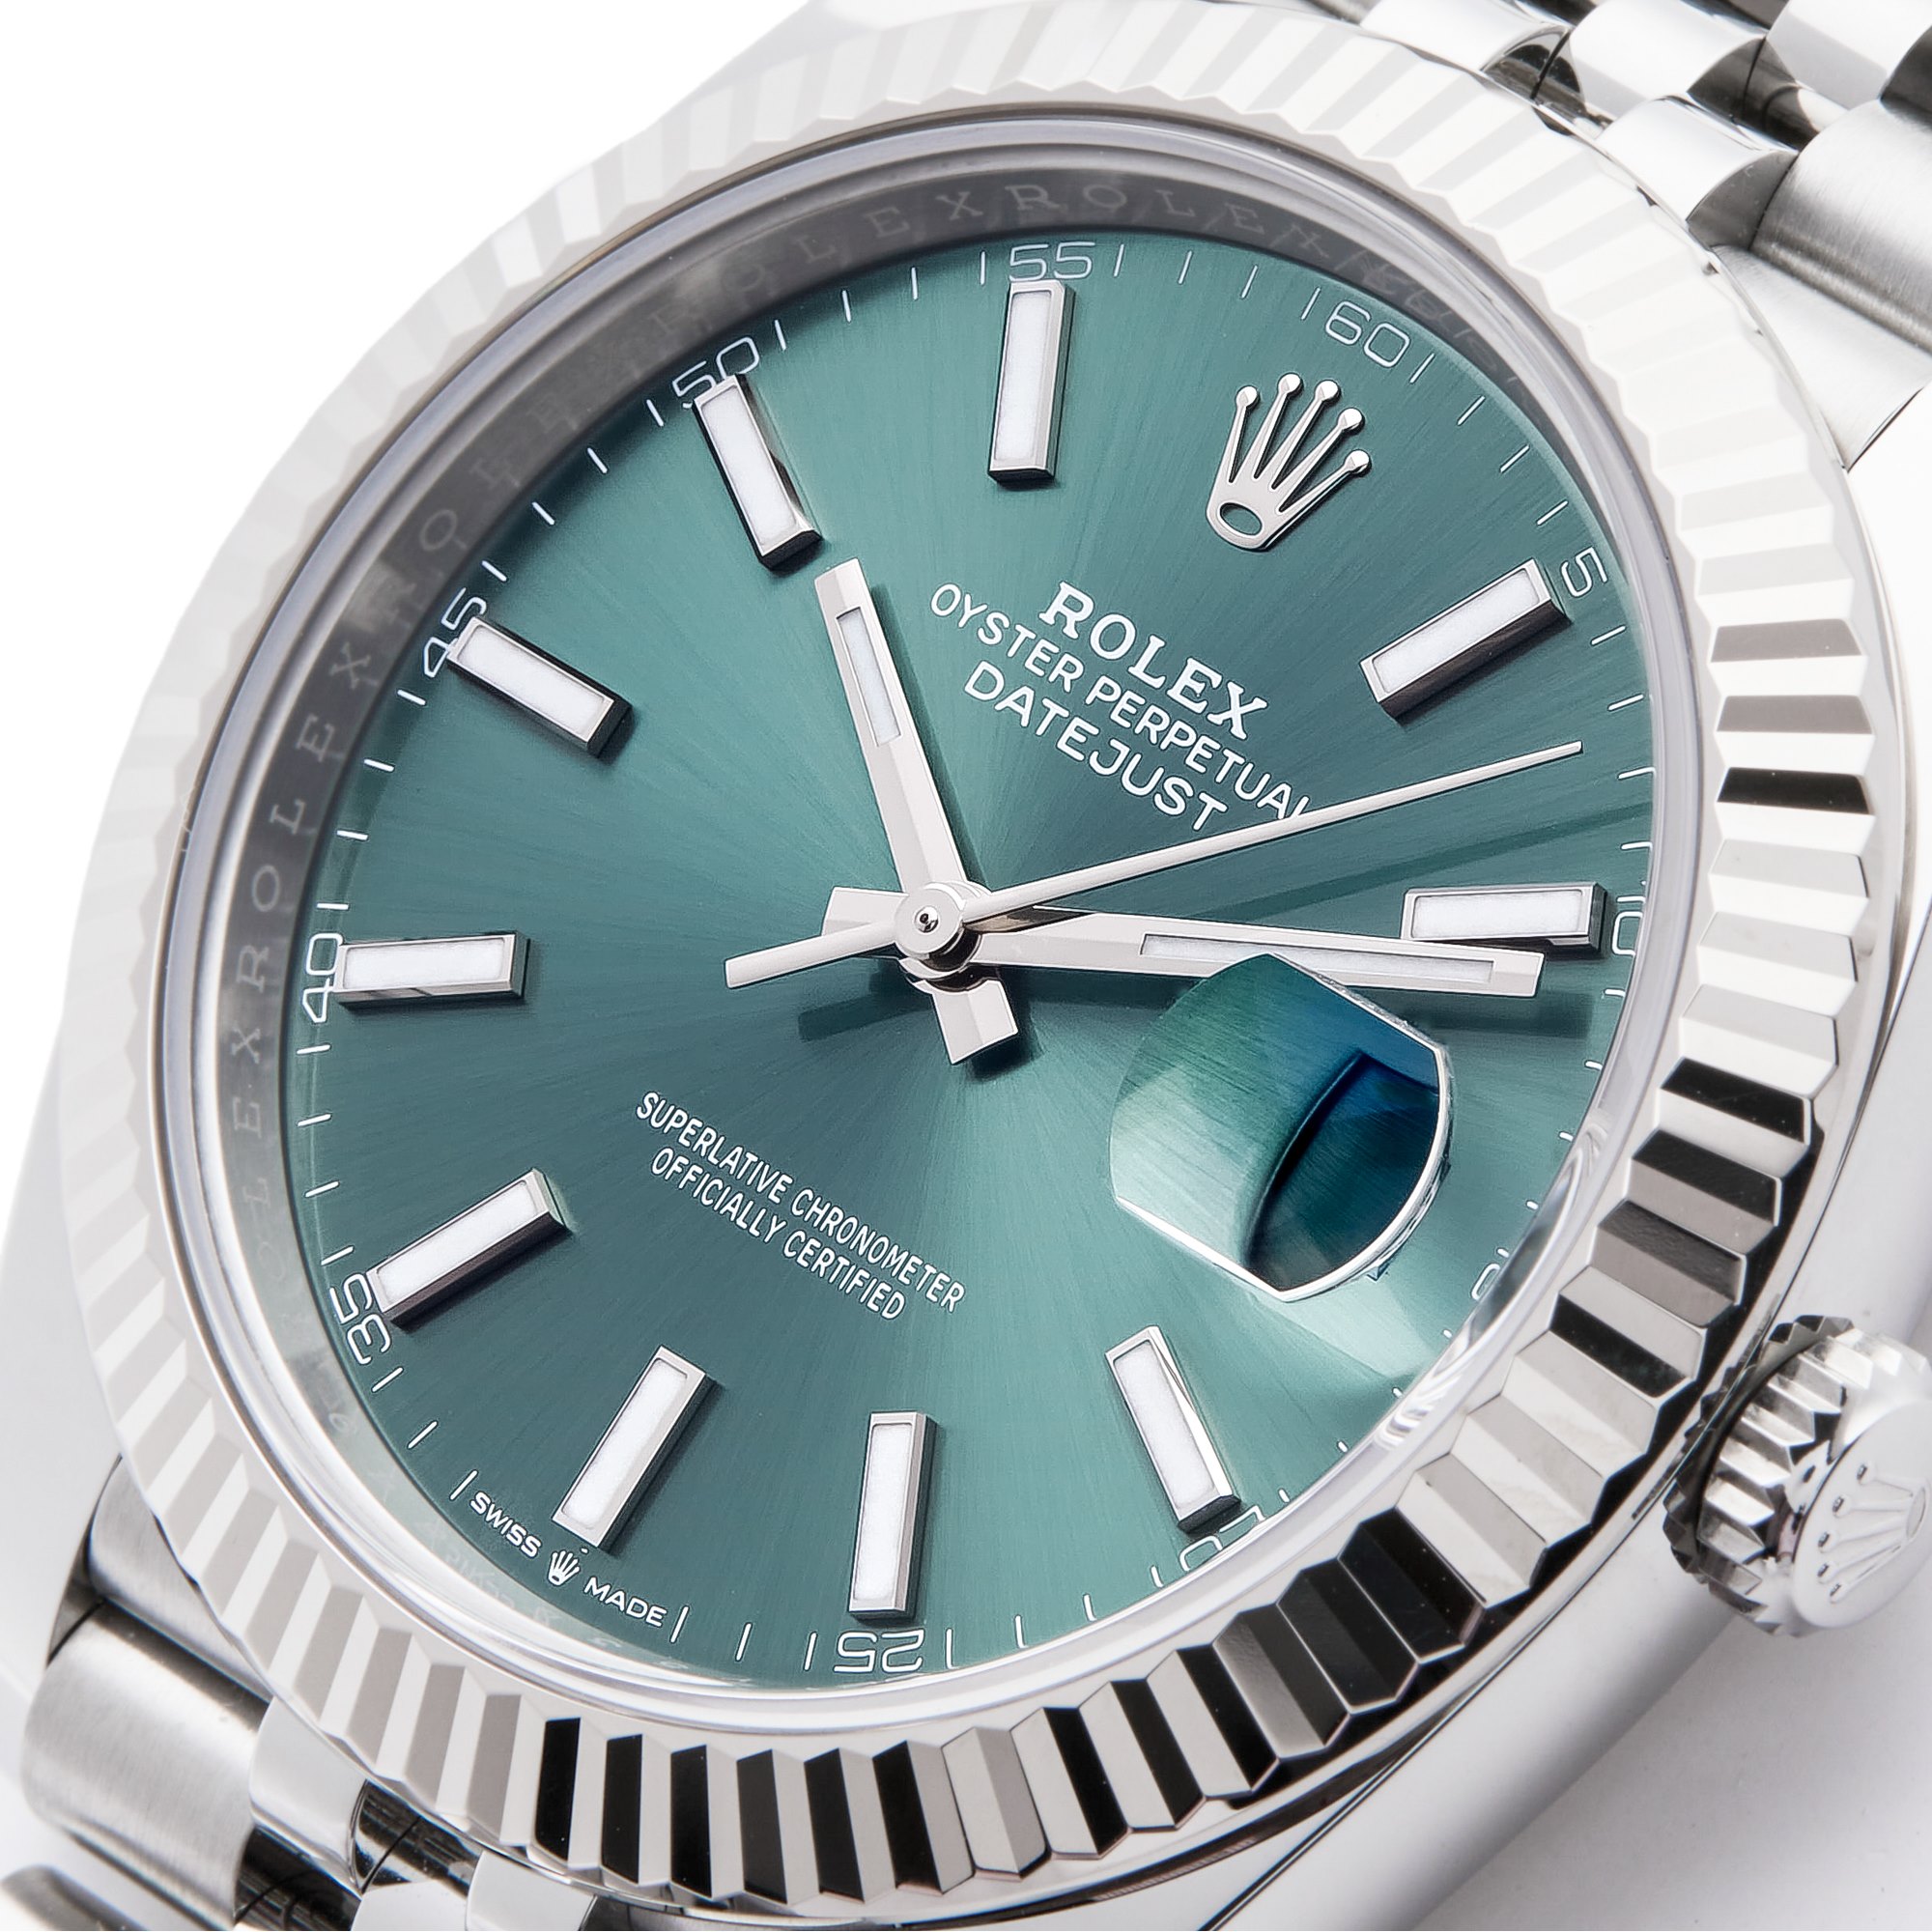 Rolex Datejust 41 Mint Green White Gold & Stainless Steel 126334